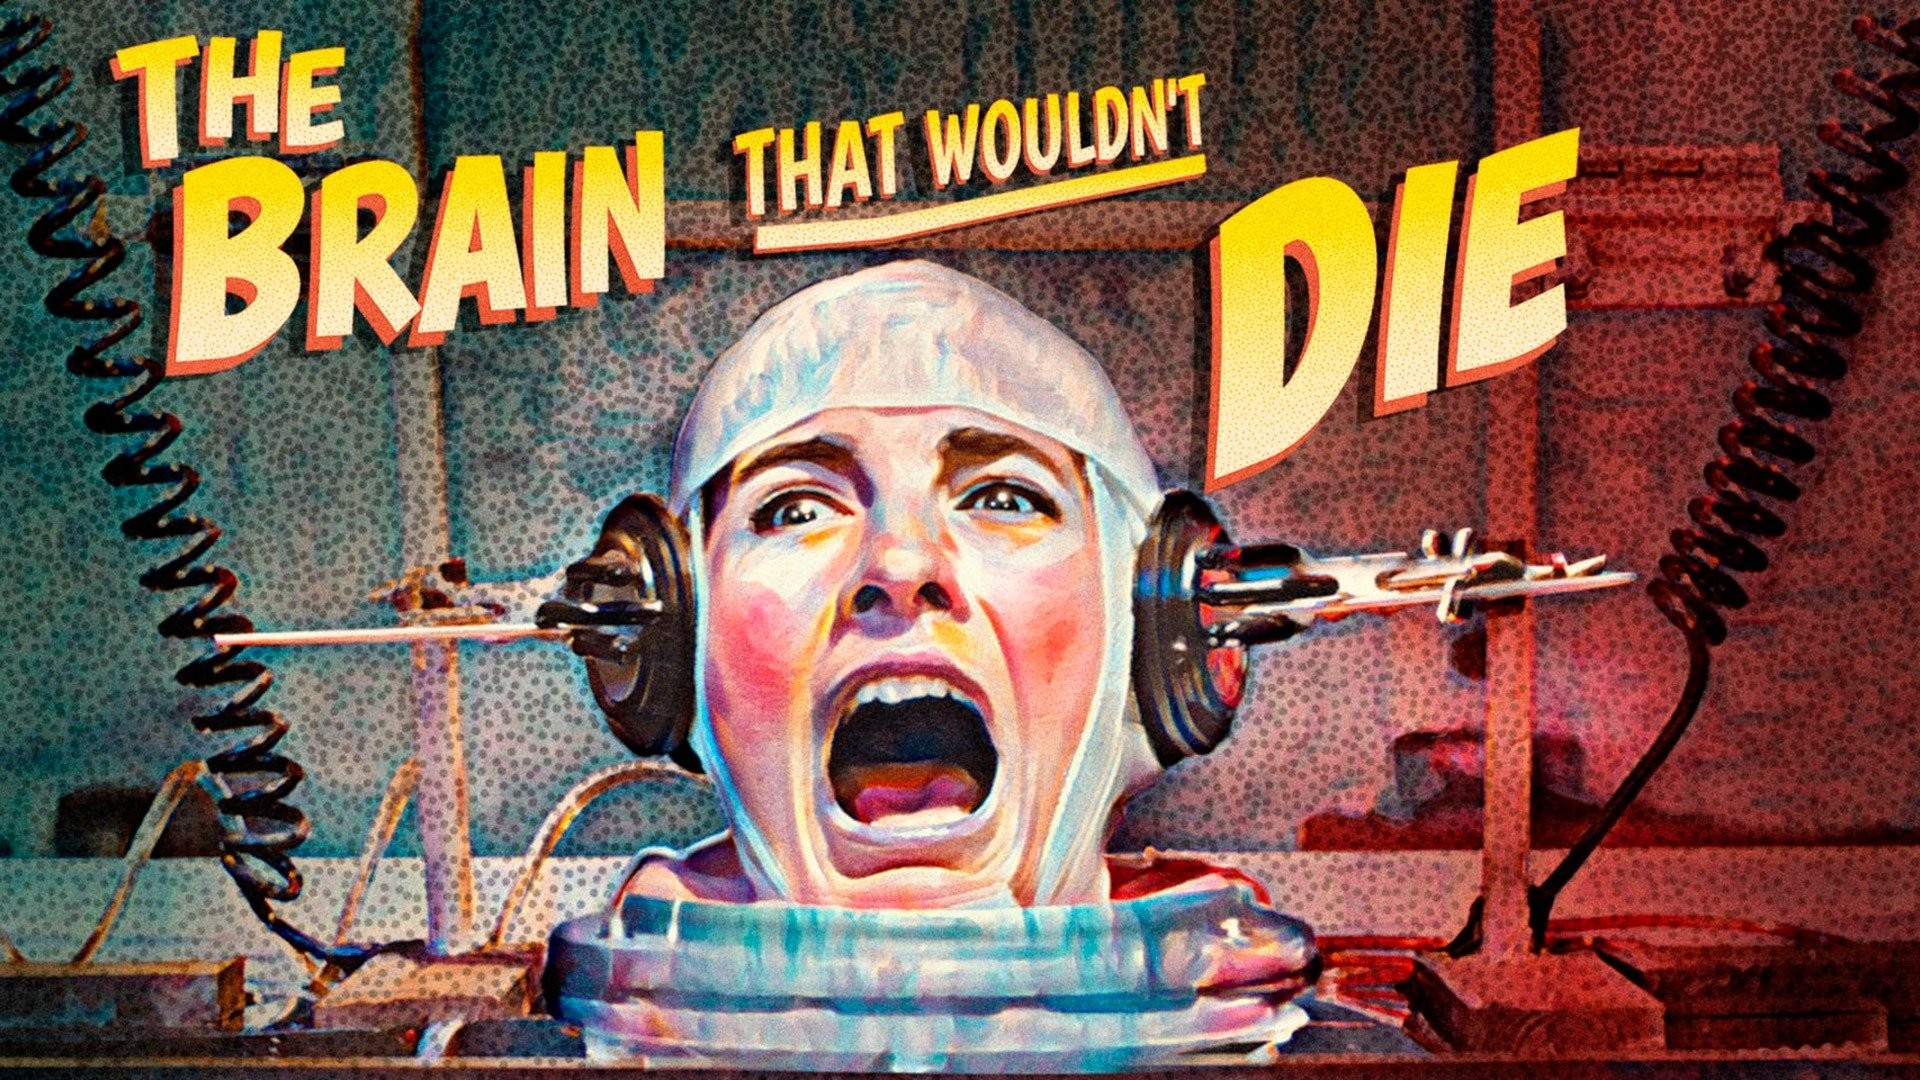 The Brain That Wouldn't Die: 60s Sci-fi Movie Review